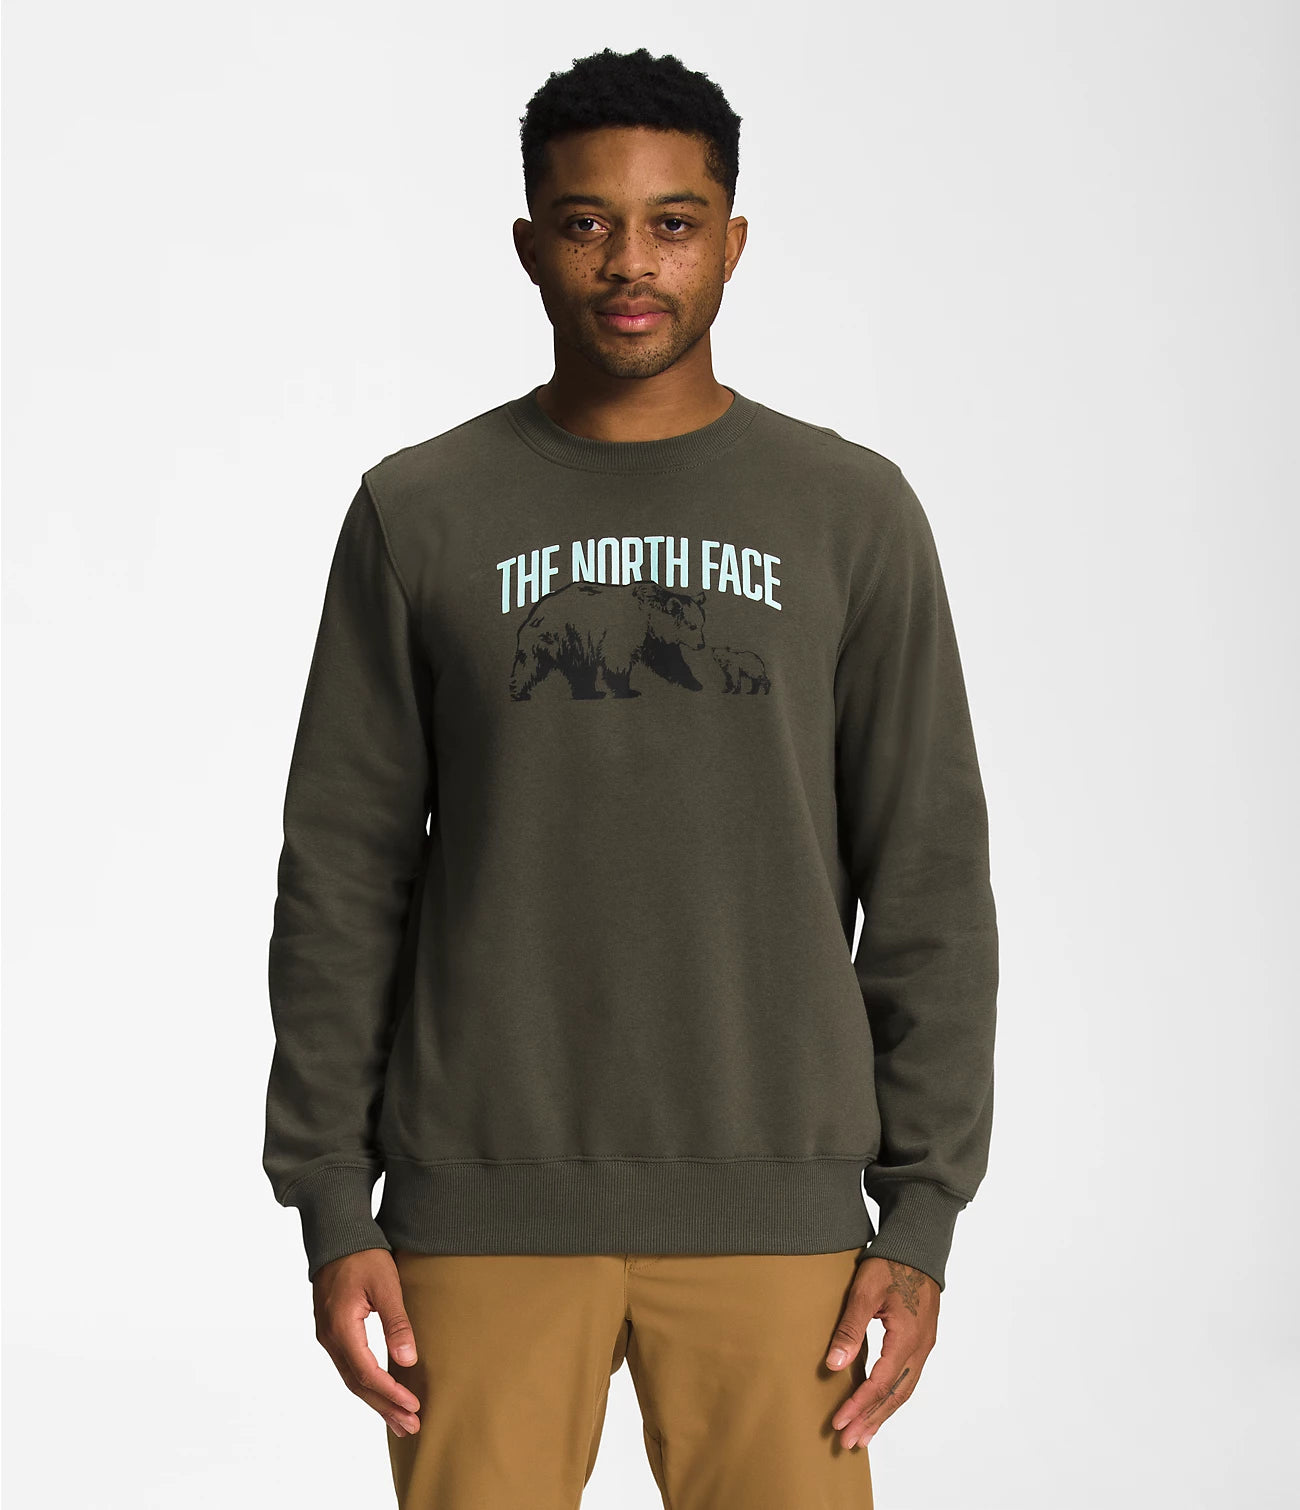 The North Face Men's Places We Love Crew